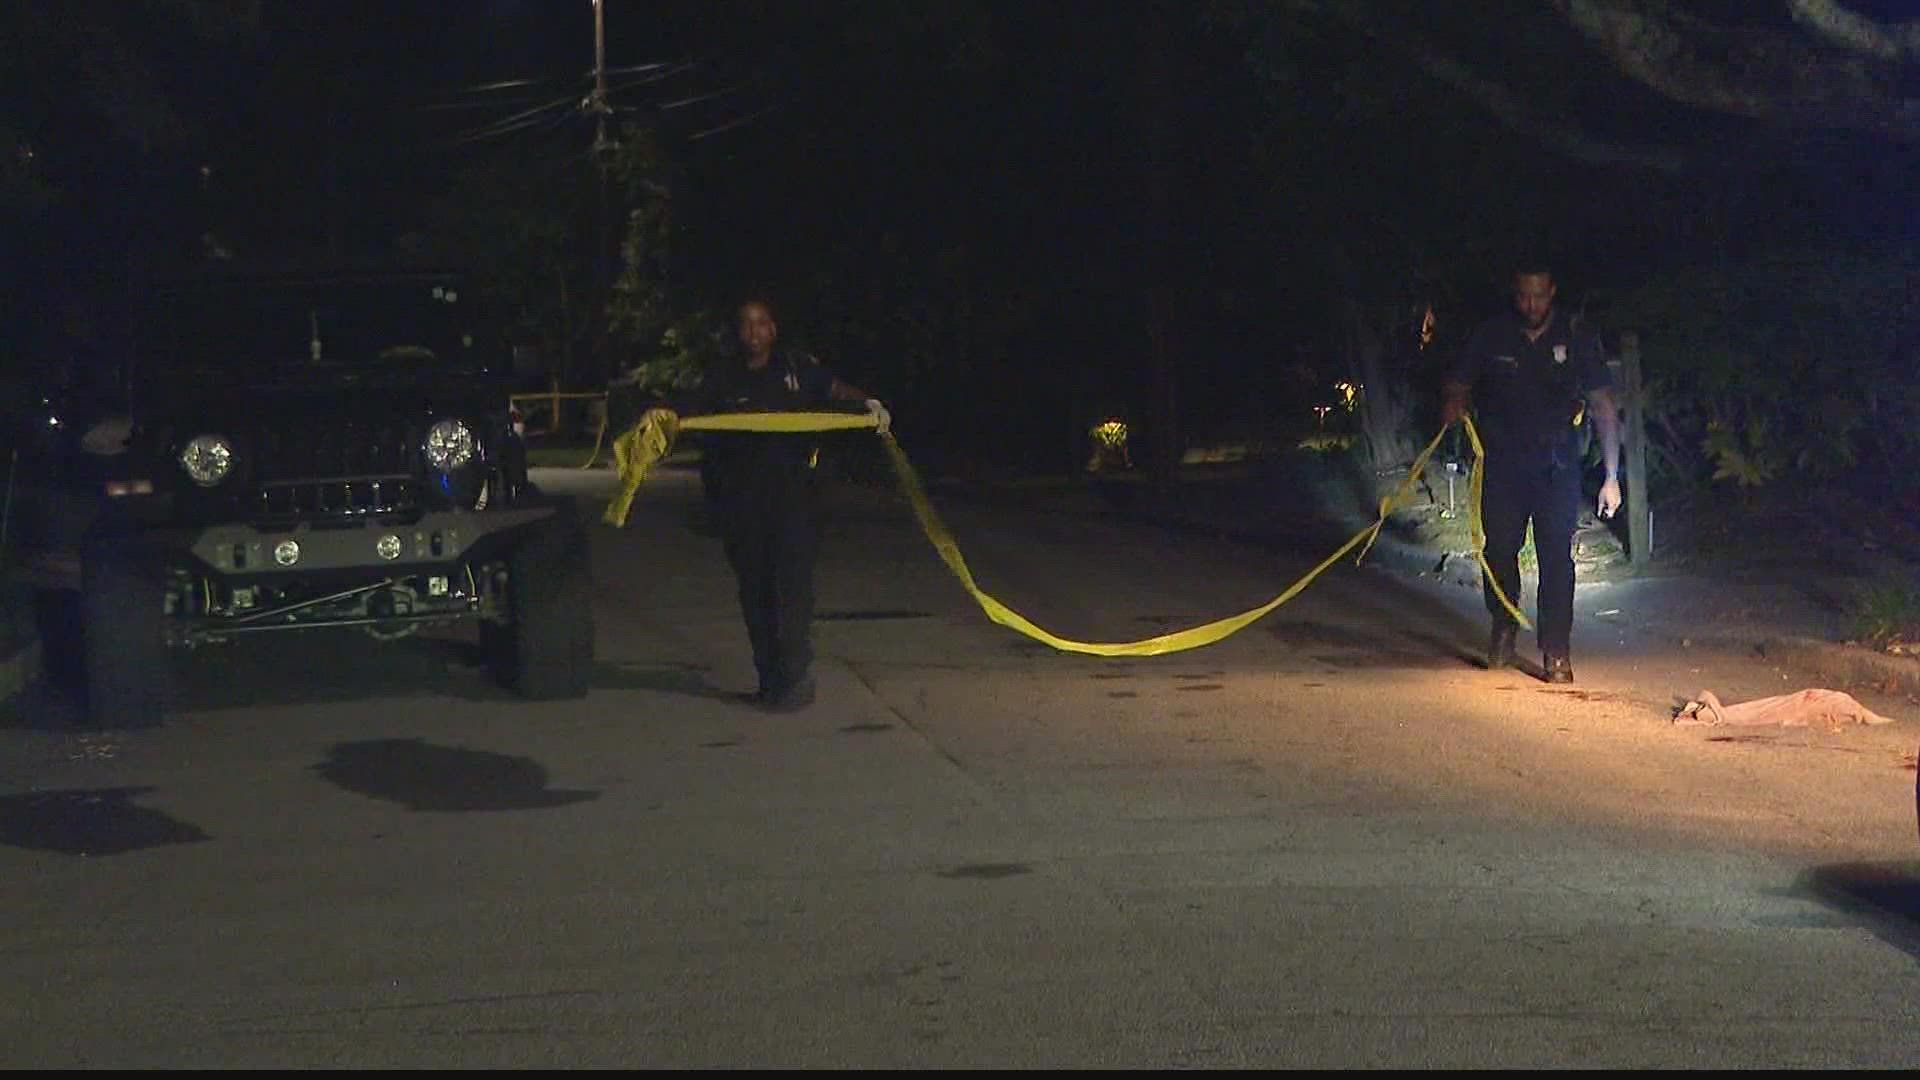 Atlanta Police responded at around 11:36 p.m. to a person shot call at a home located off Middlesex Avenue NE.